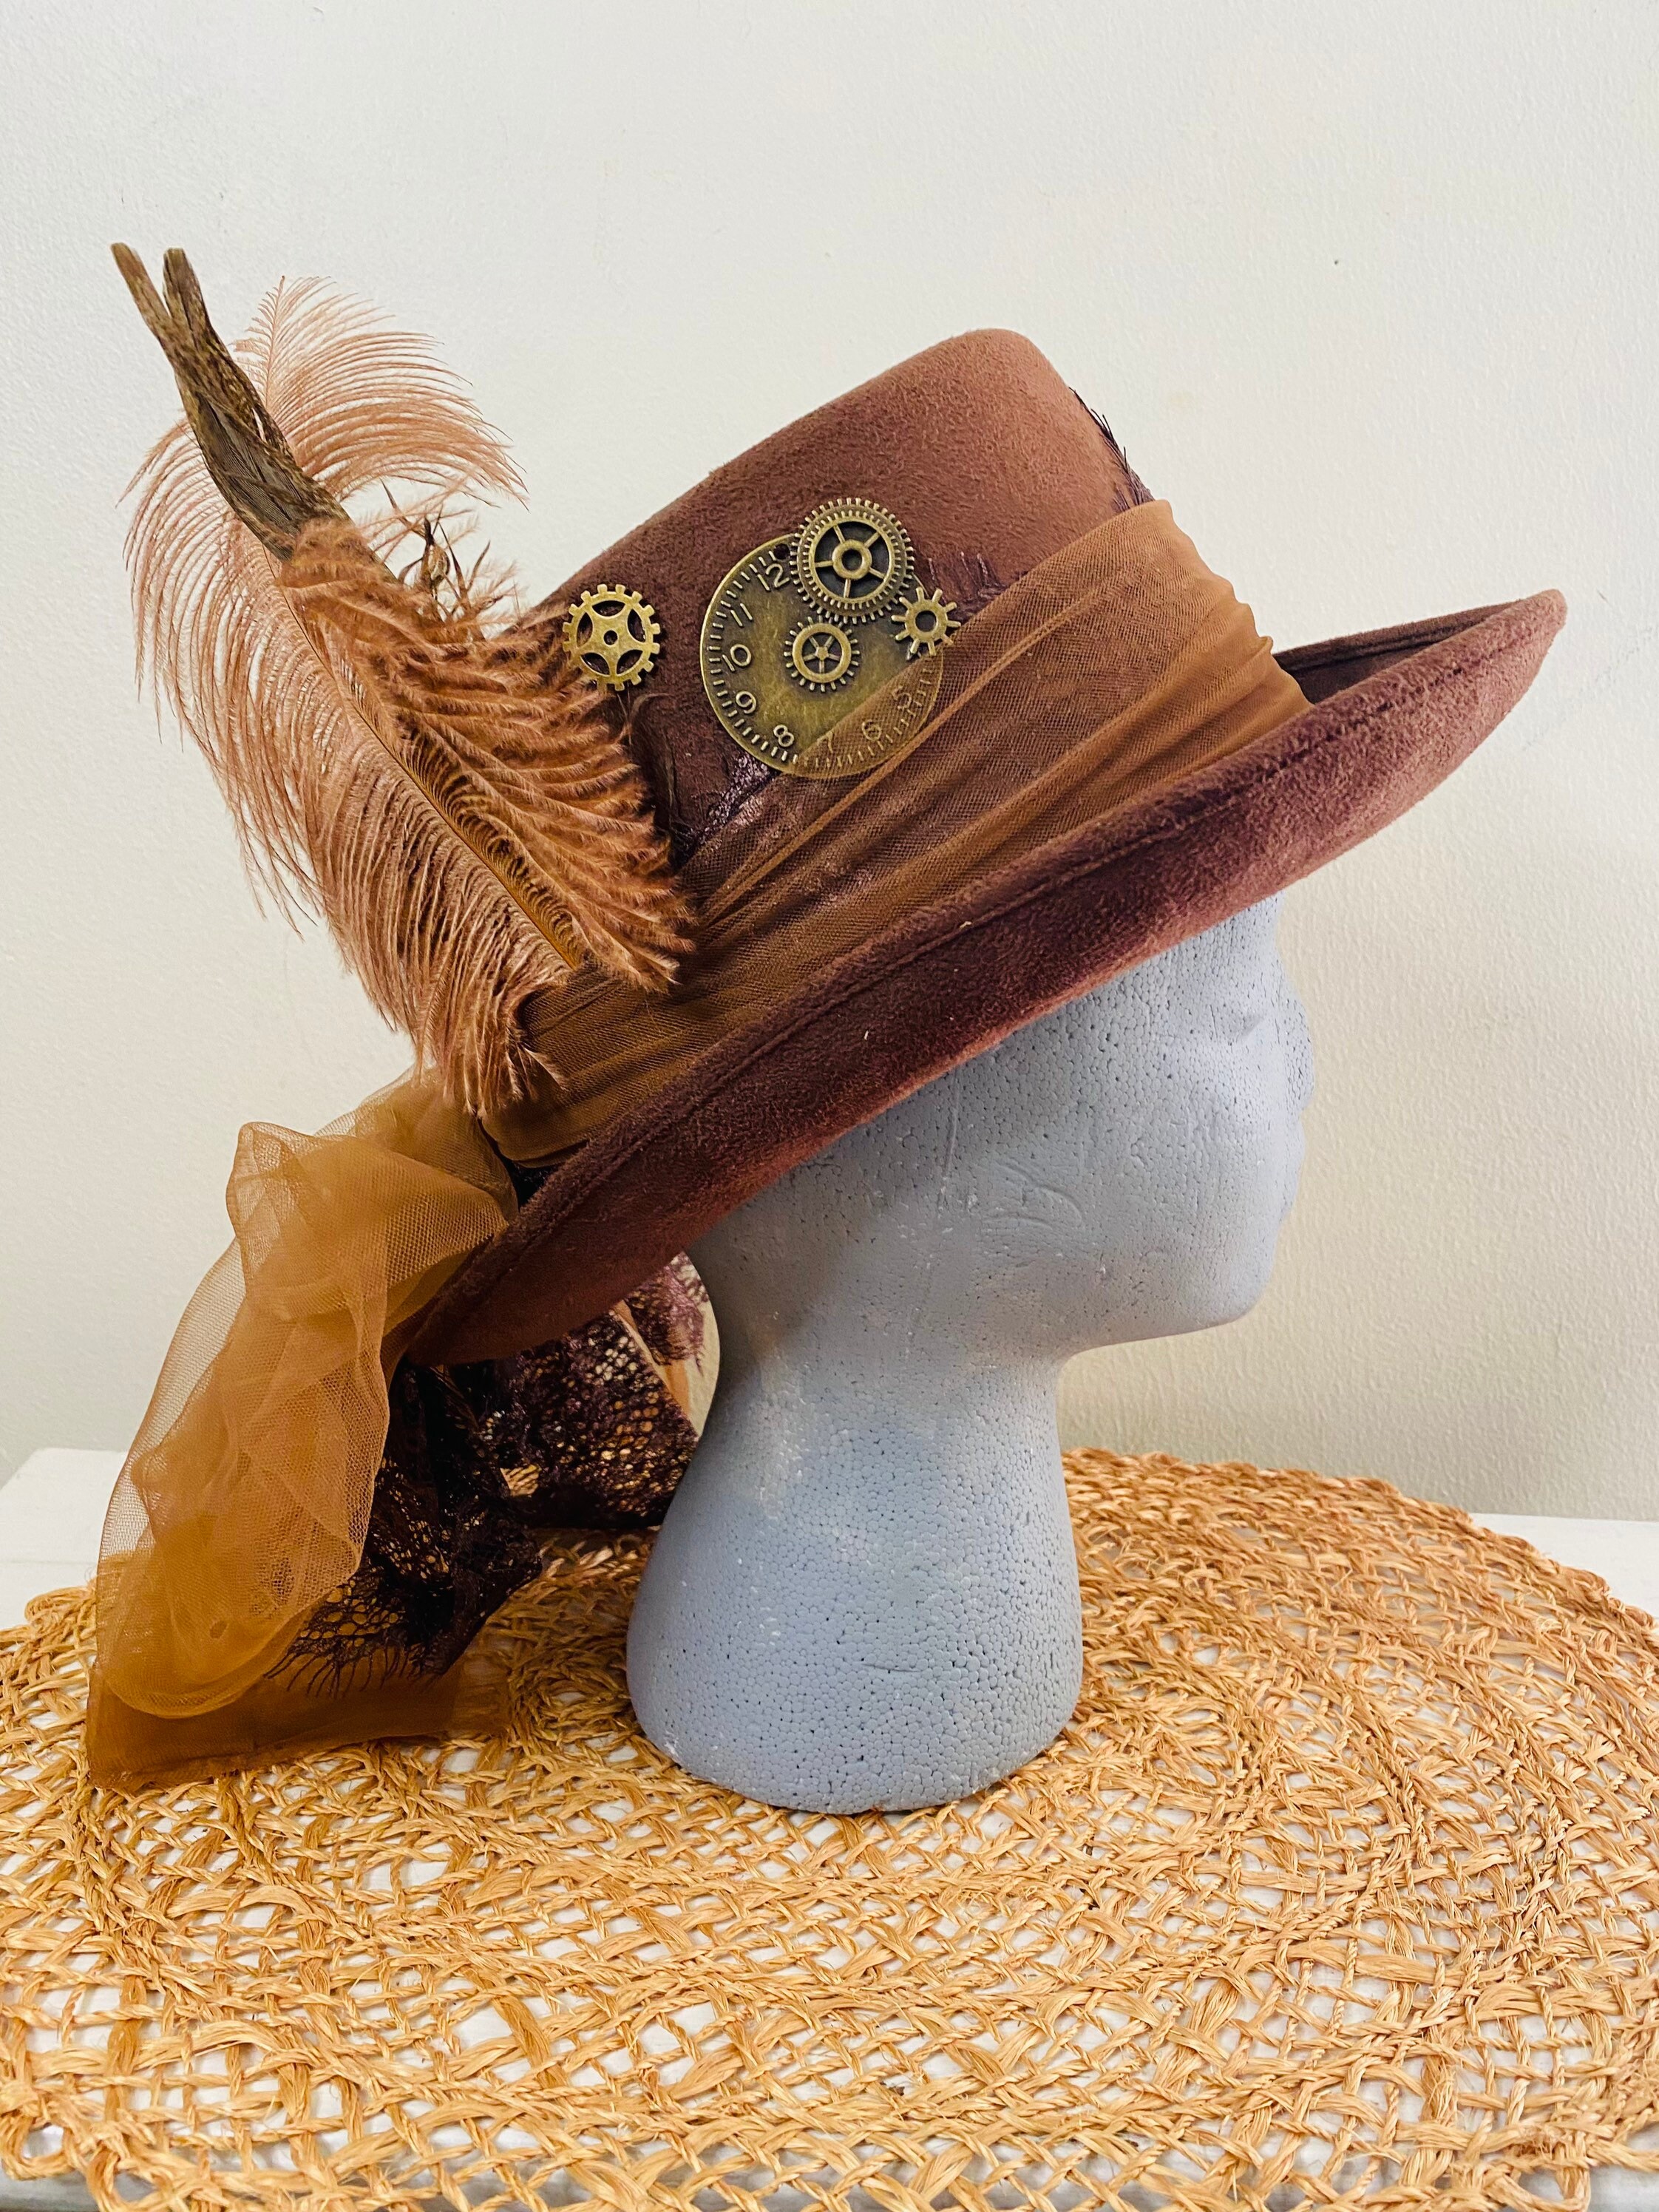 Vintage Top Hat, Brown Suede-like, Decorated, Feathers, Taffeta